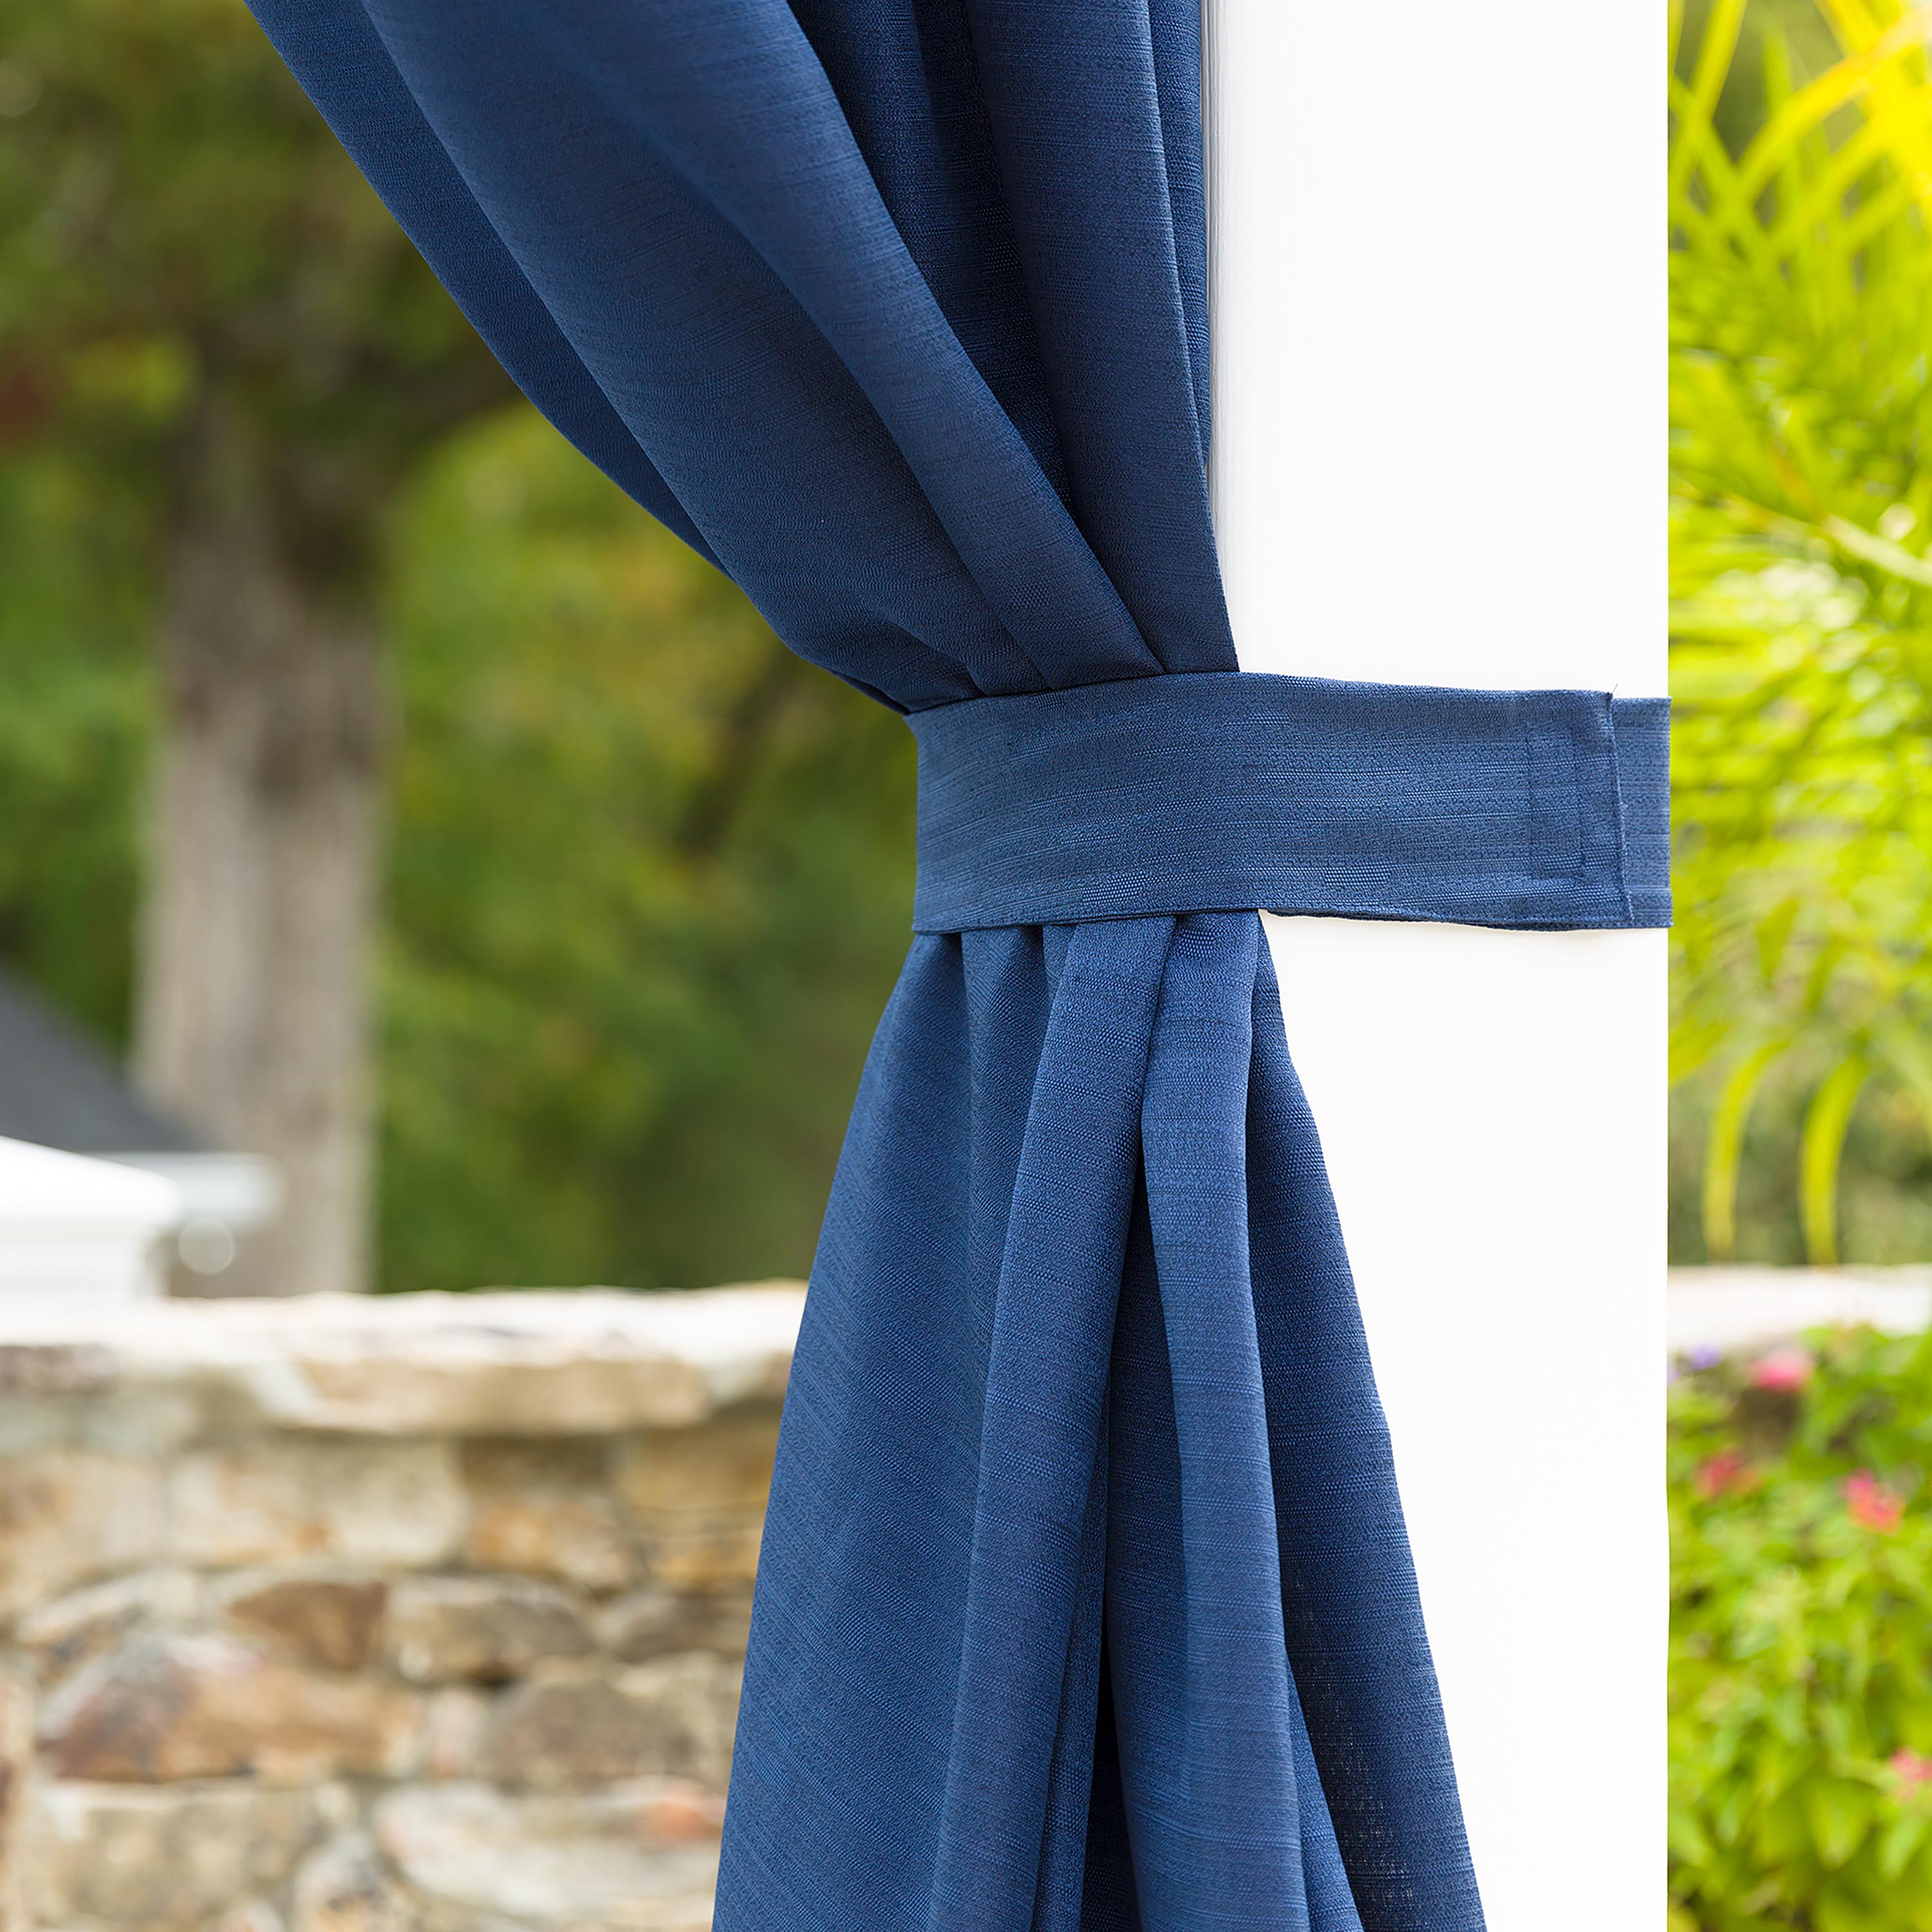 Grasscloth Outdoor Curtain Panel with Grommet Top, 54"W x 108"L